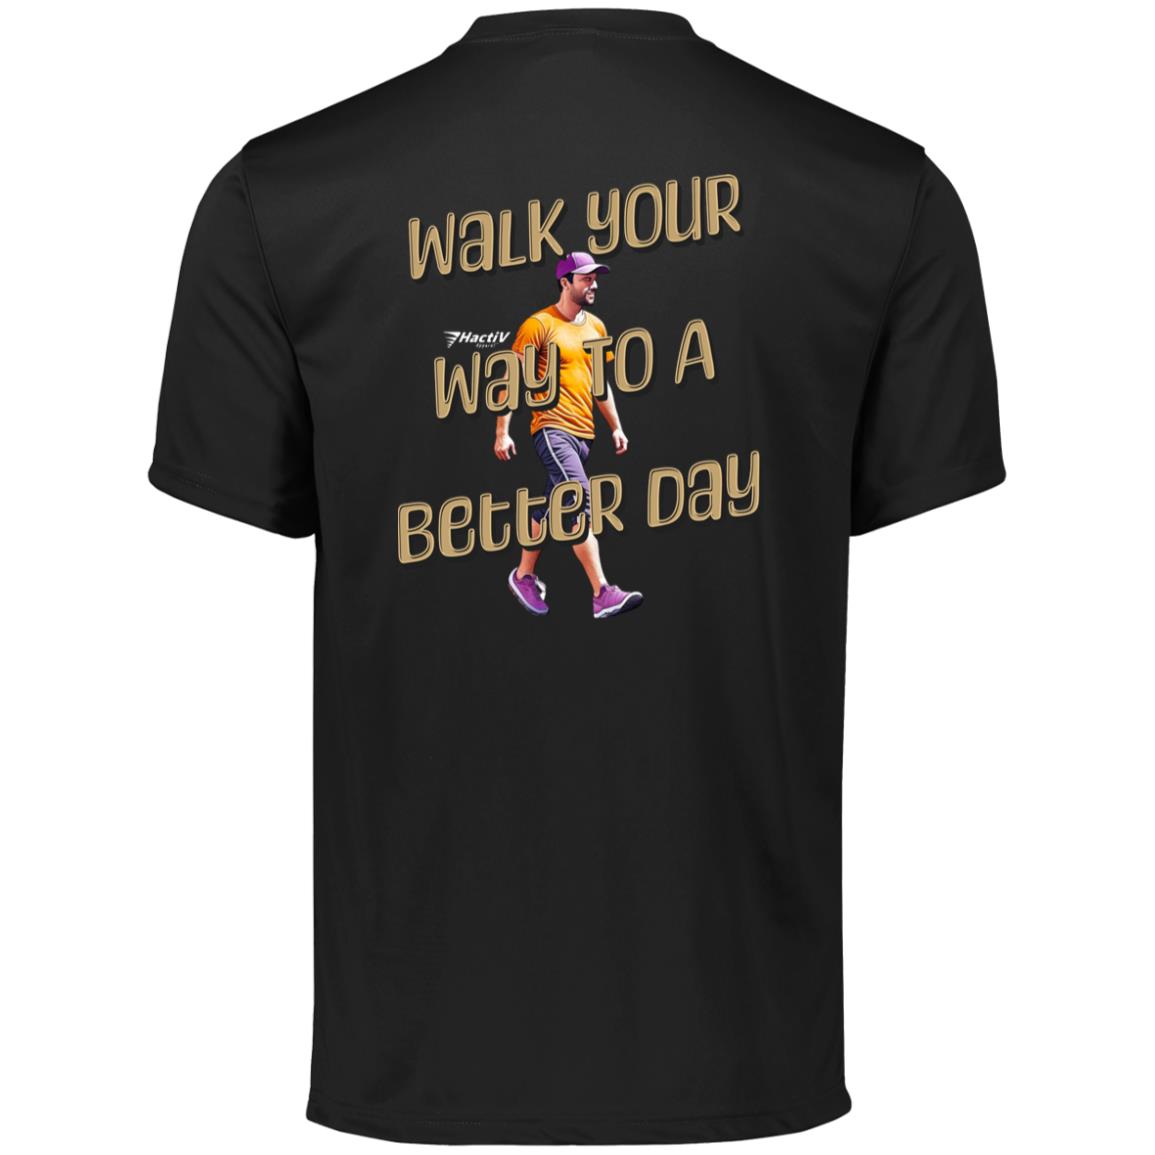 Walk Your Way to a Better Day Activewear Tee